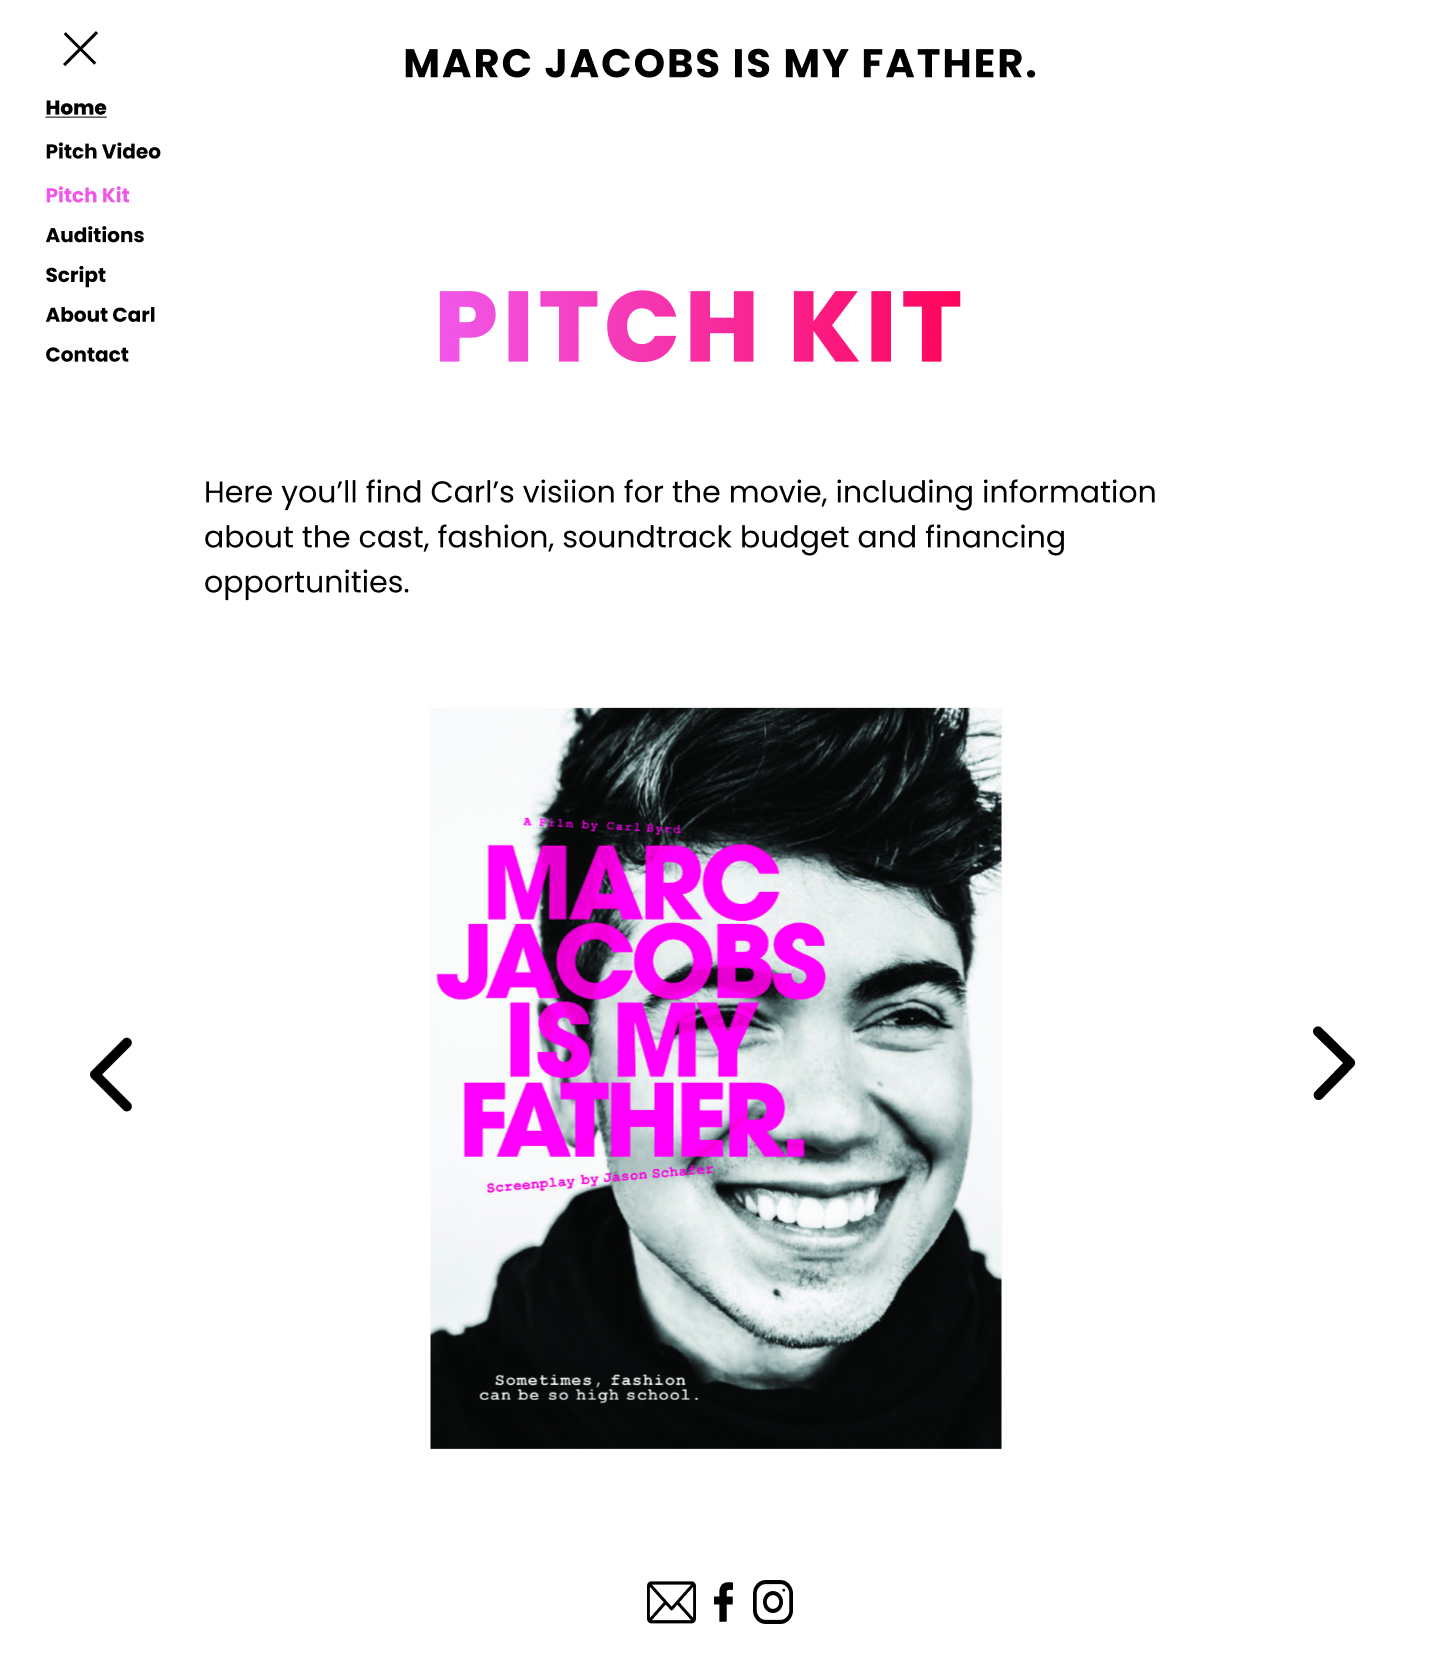 Proposed Pitch Kit Page for Marc Jacobs is my Father.